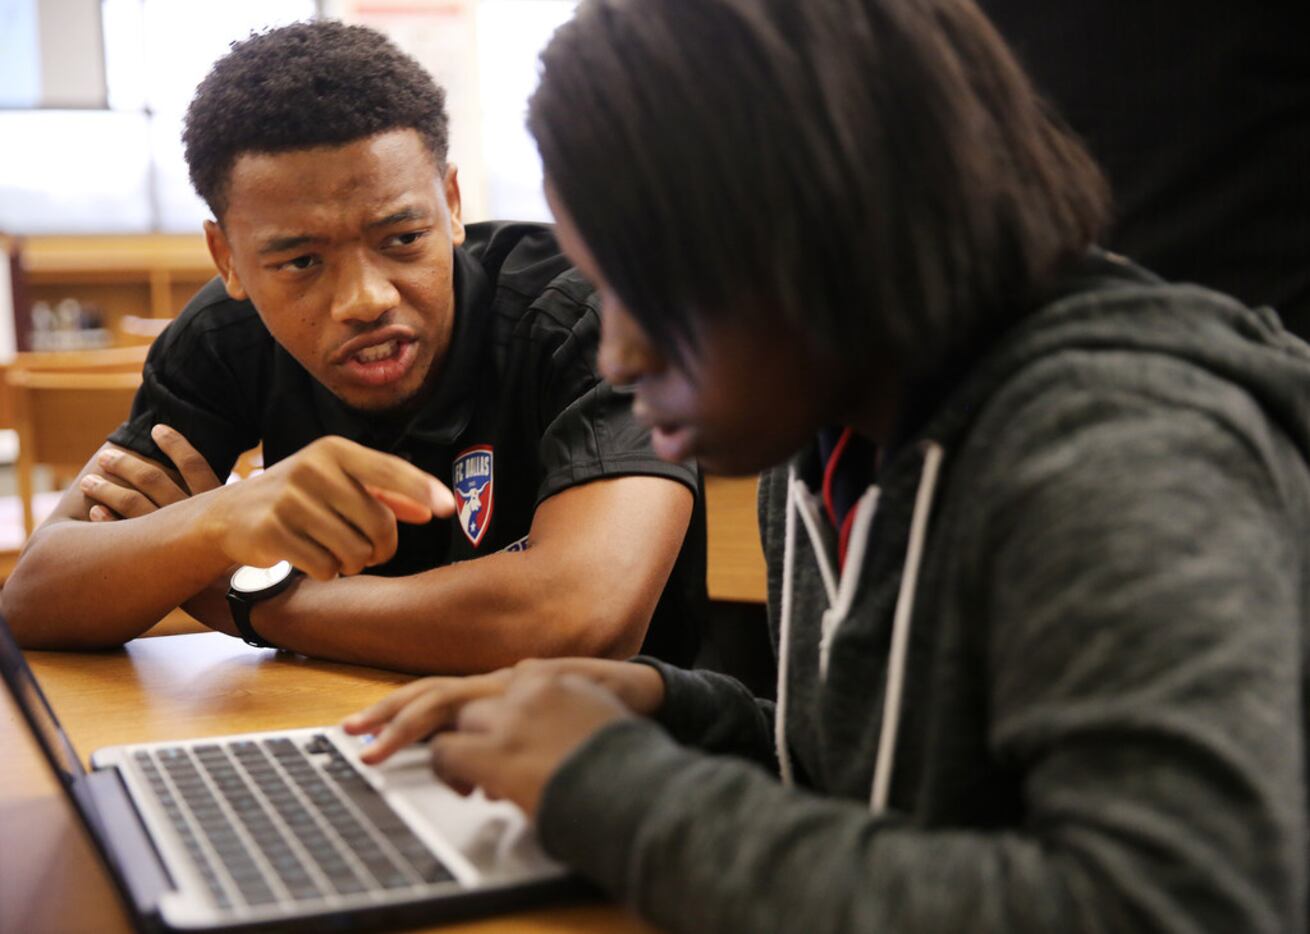 FC Dallas player Jacori Hayes works on a programming activity with a student during a...